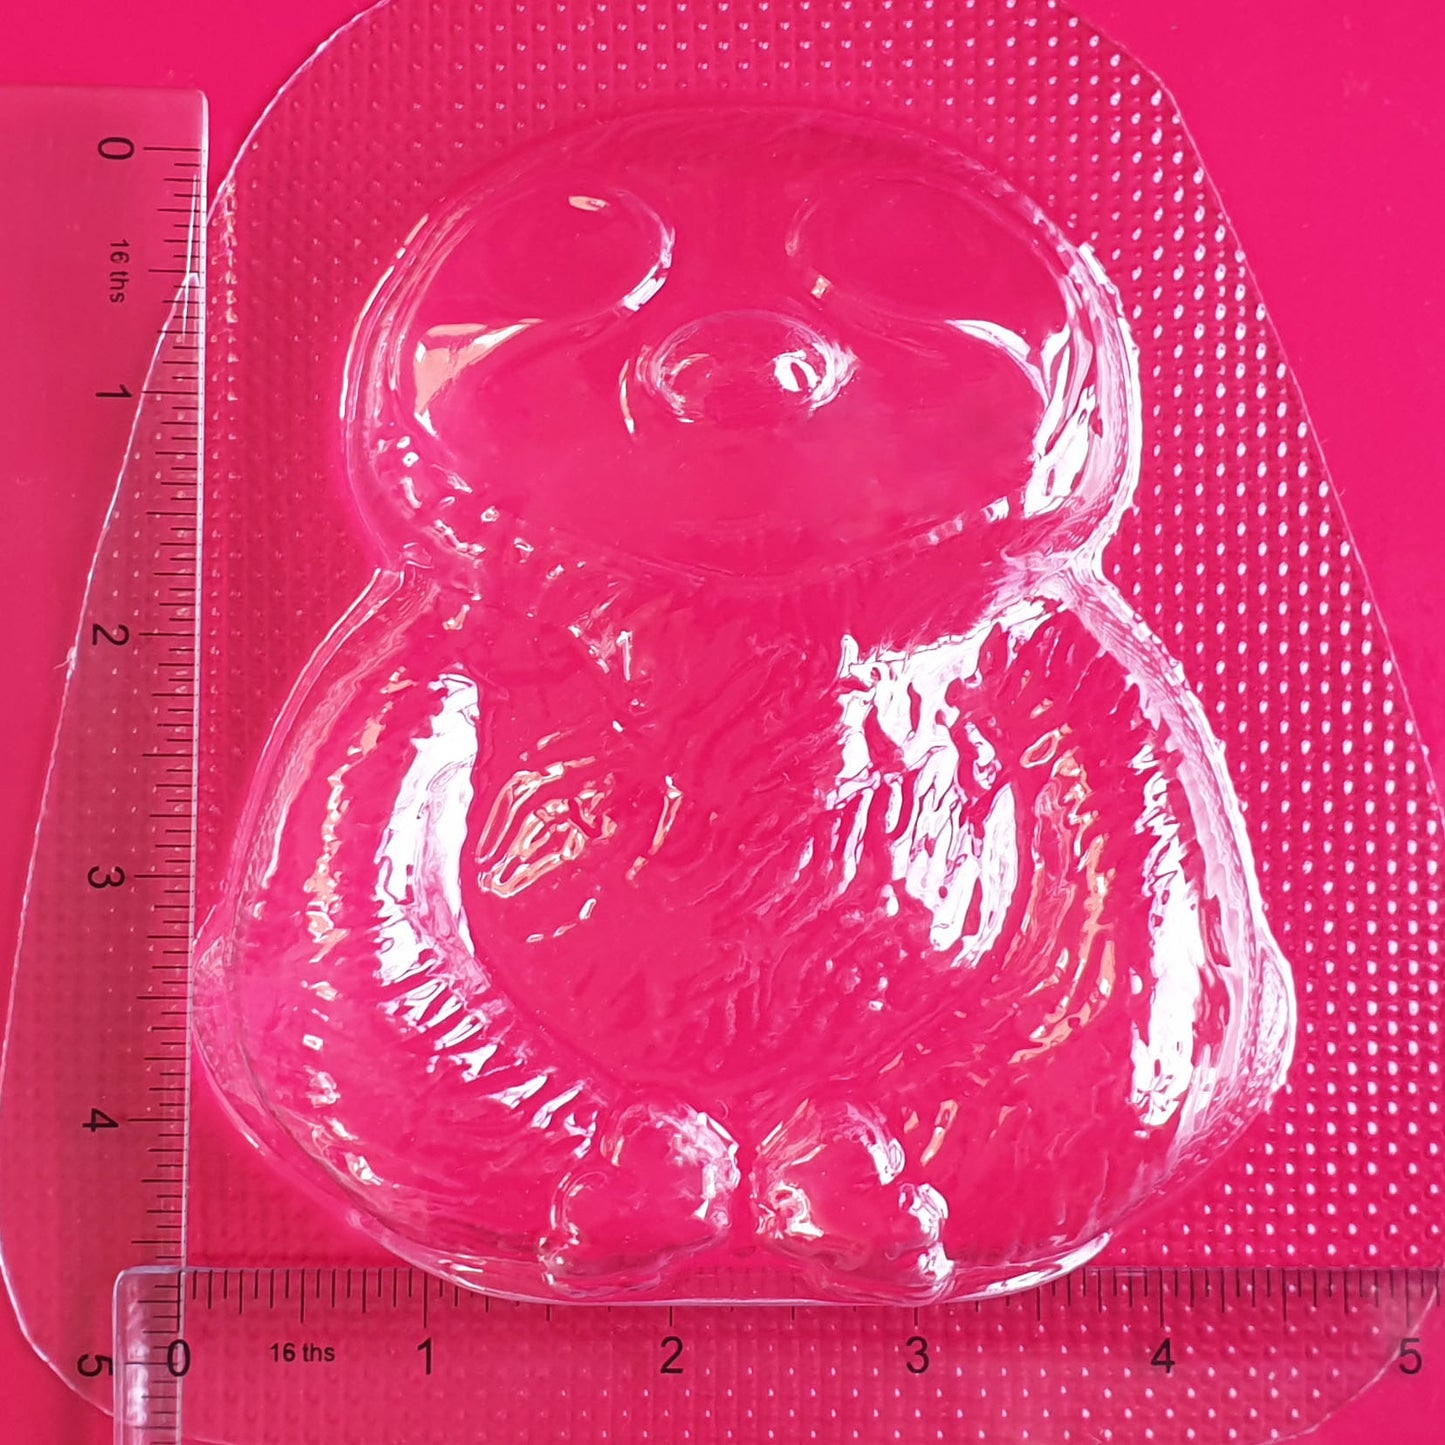 Sloth XL Mould | Truly Personal | Bath Bomb, Soap, Resin, Chocolate, Jelly, Wax Melts Mold